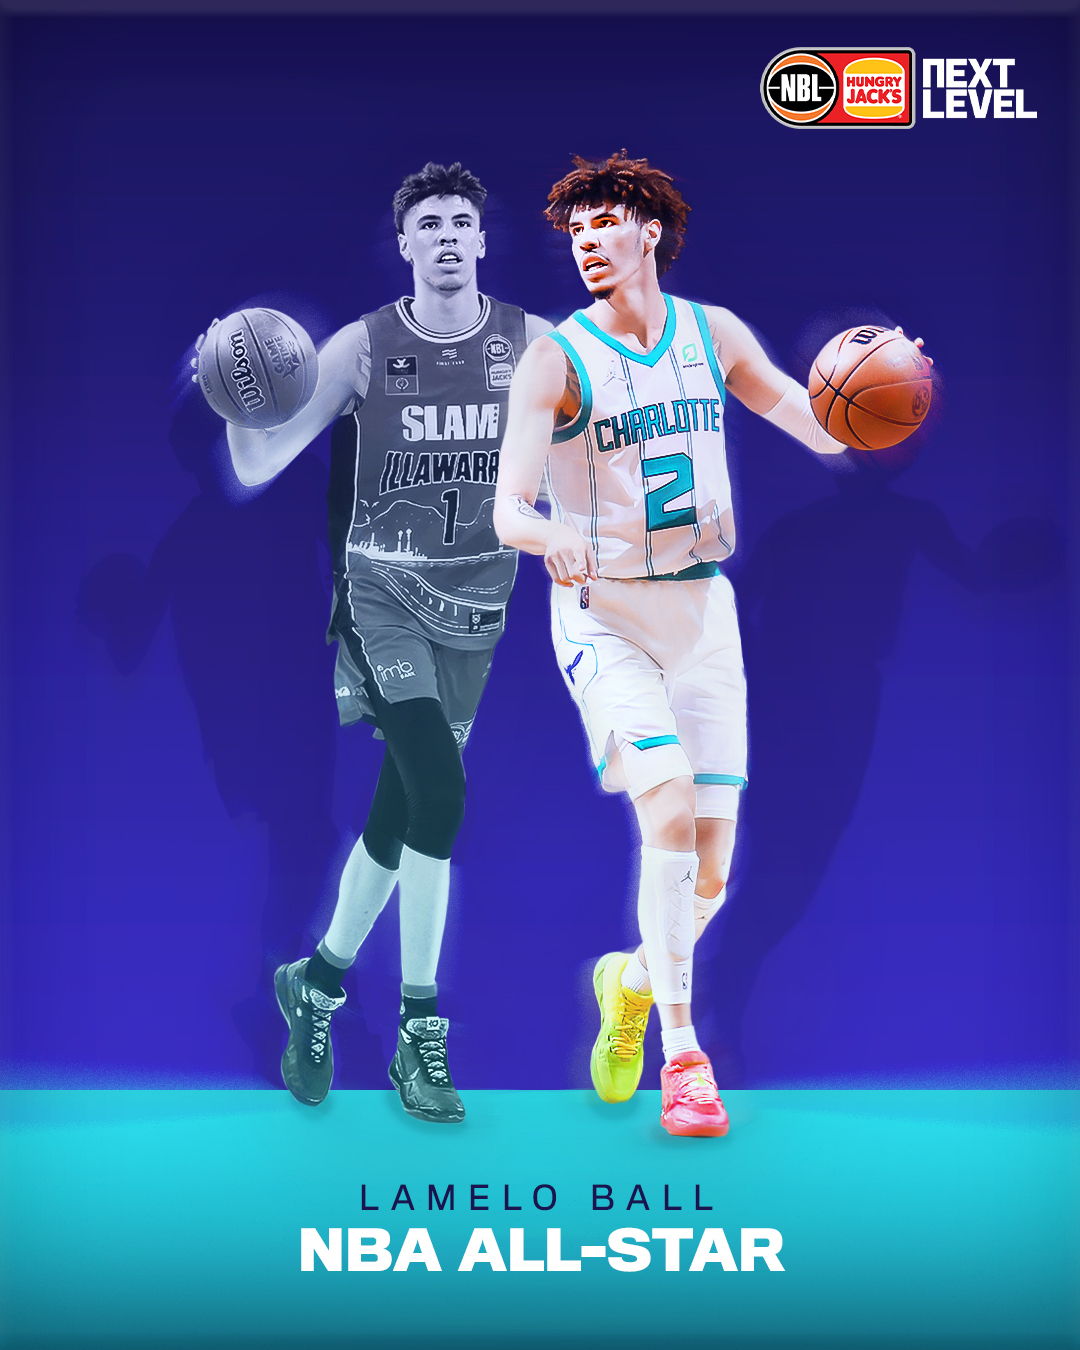 LaMelo Ball signs with Illawarra